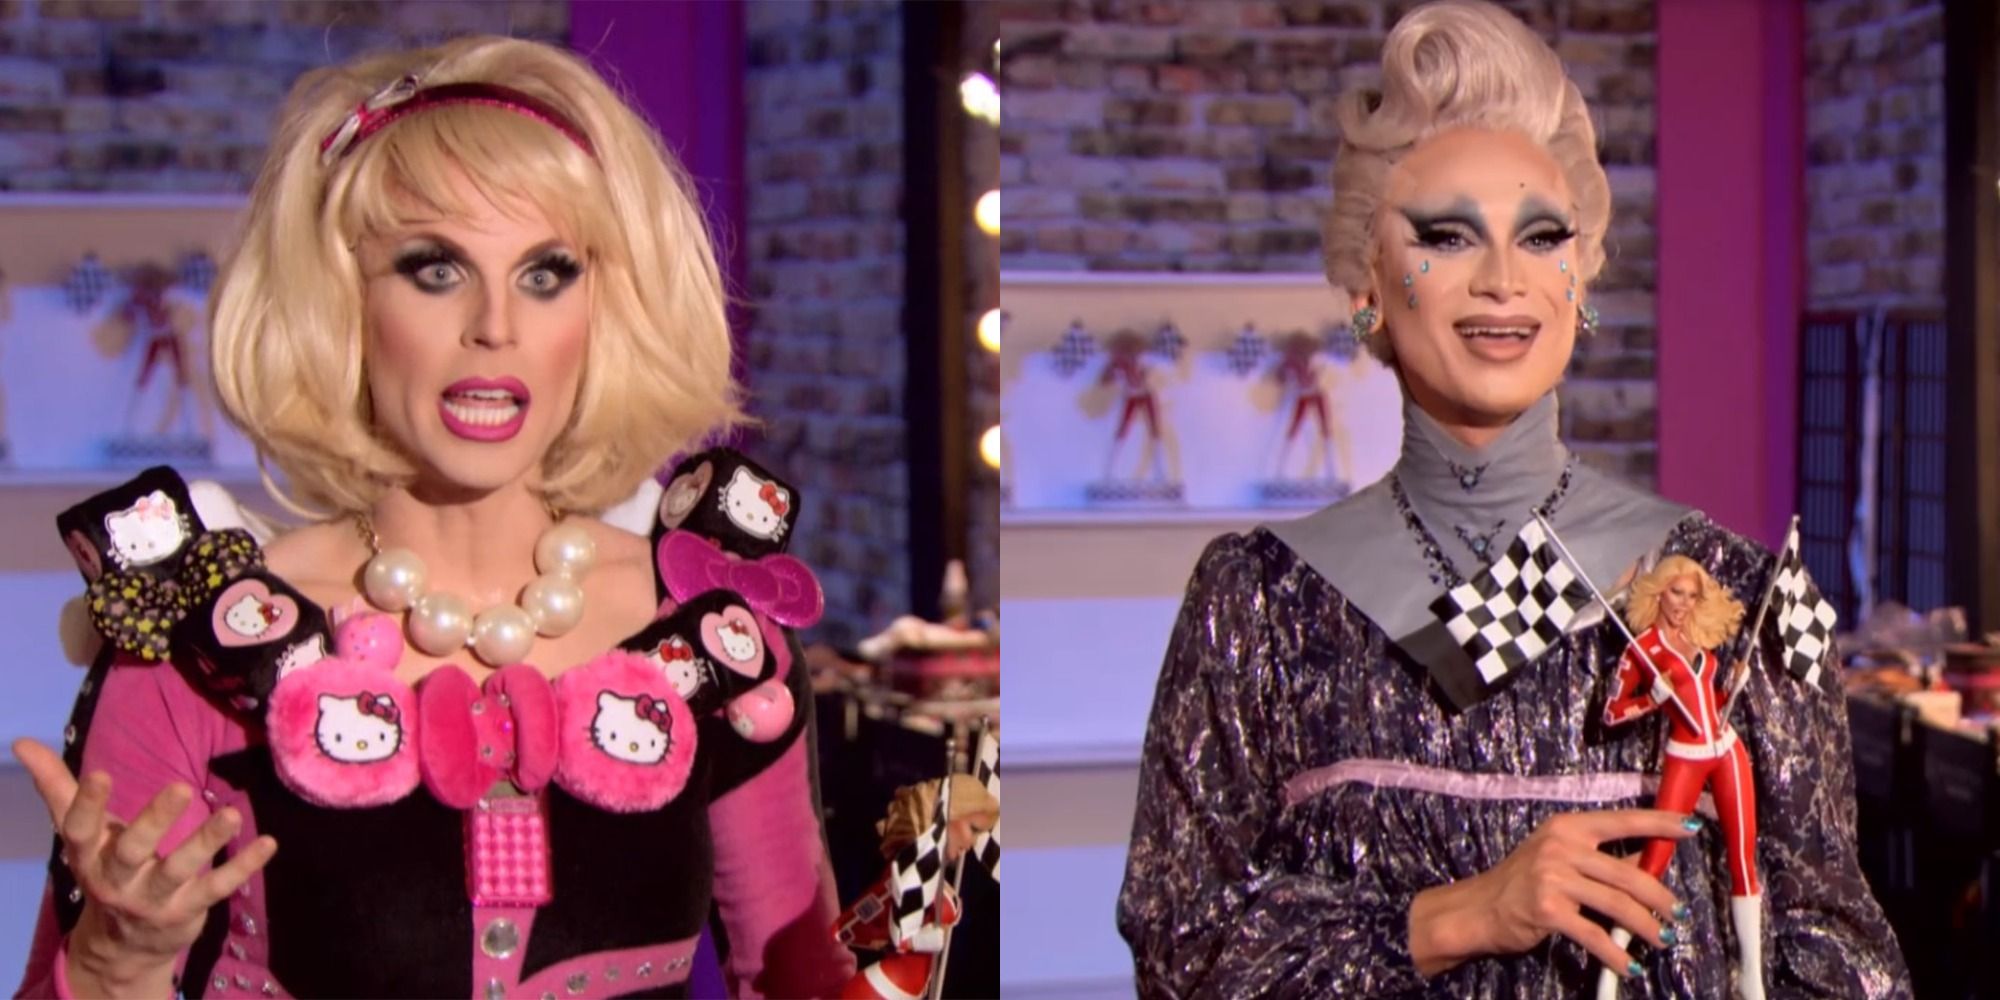 Katya and Miss Fame after their eliminations